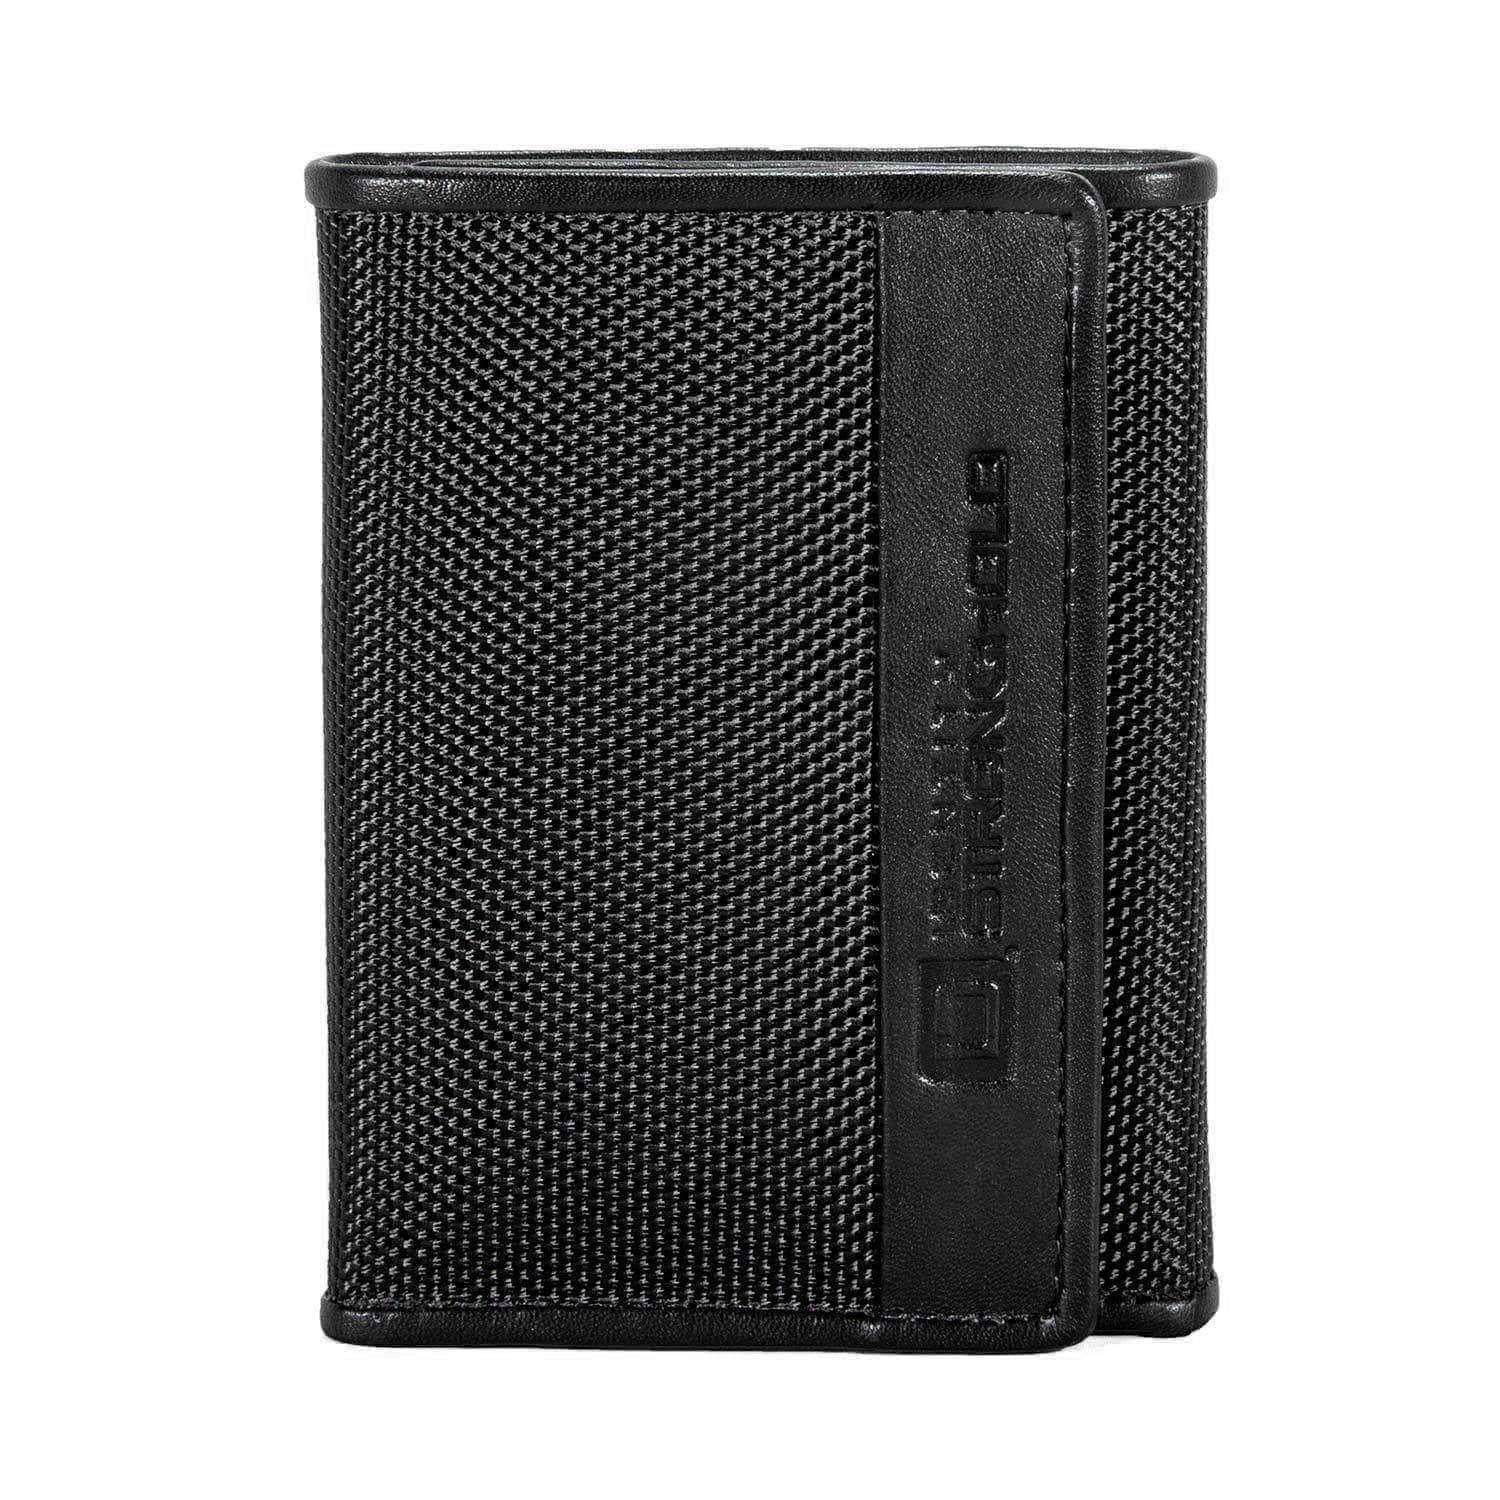 ID Stronghold Men's Wallet Black Mens Slim RFID Trifold Wallet with ID in Leather and Nylon